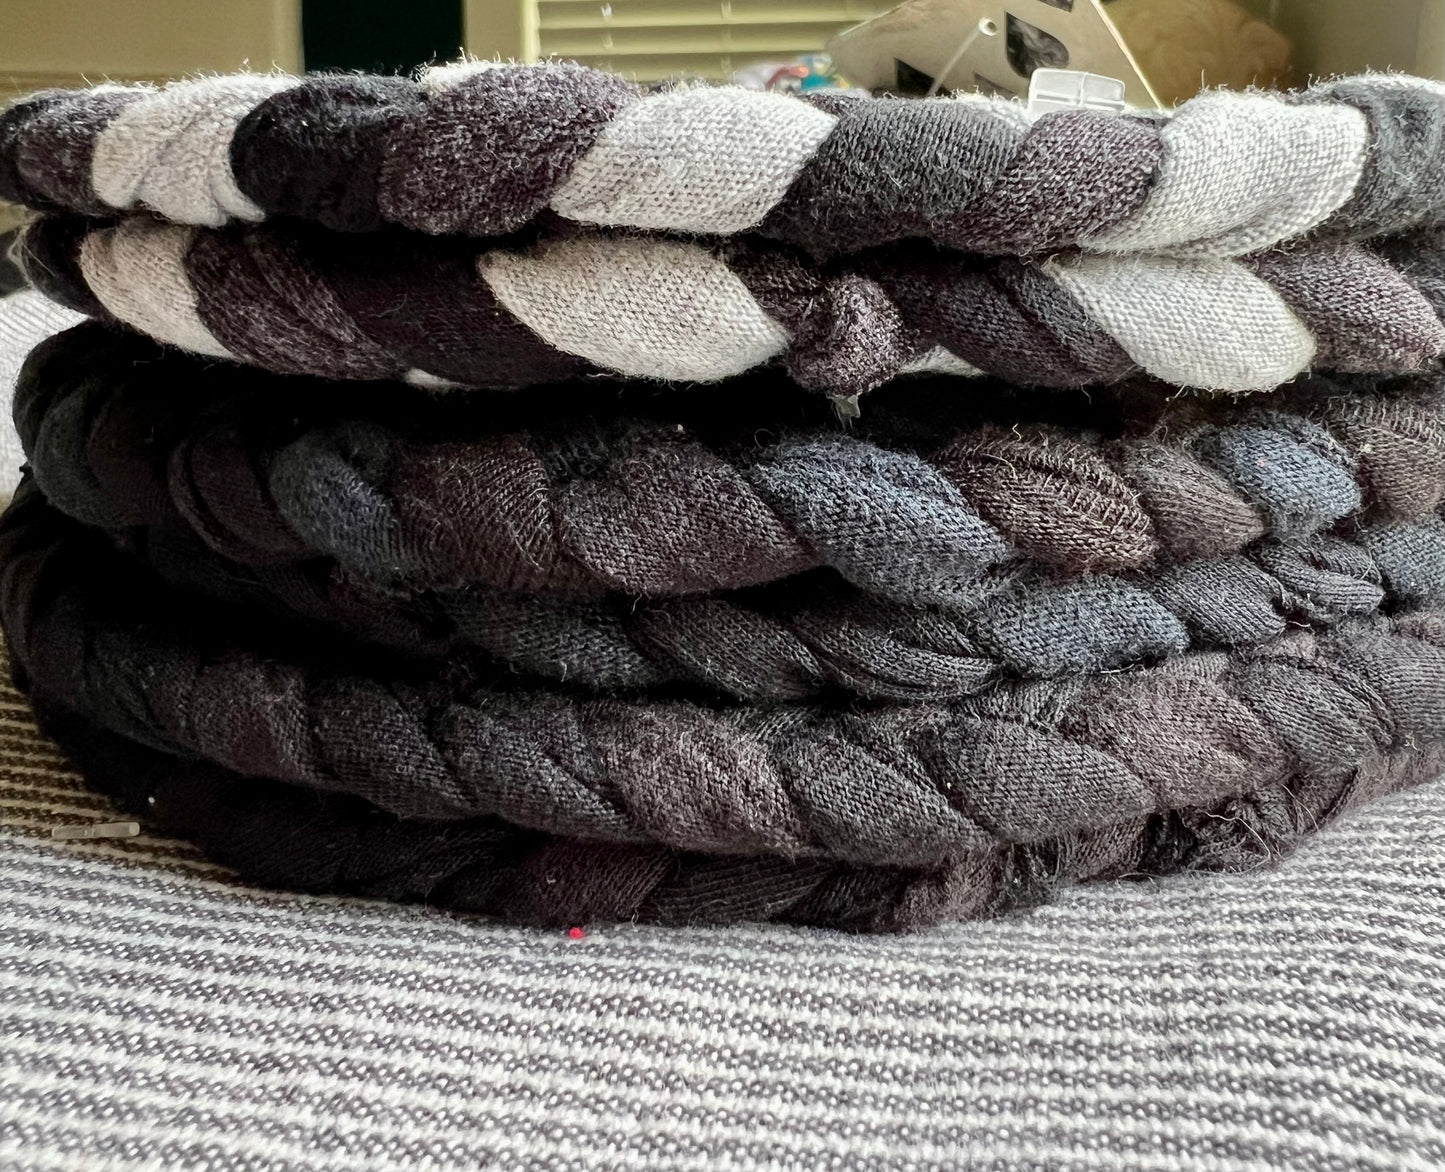 Stack of trivet potholders, showing the edges as they are stacked on top of each other.